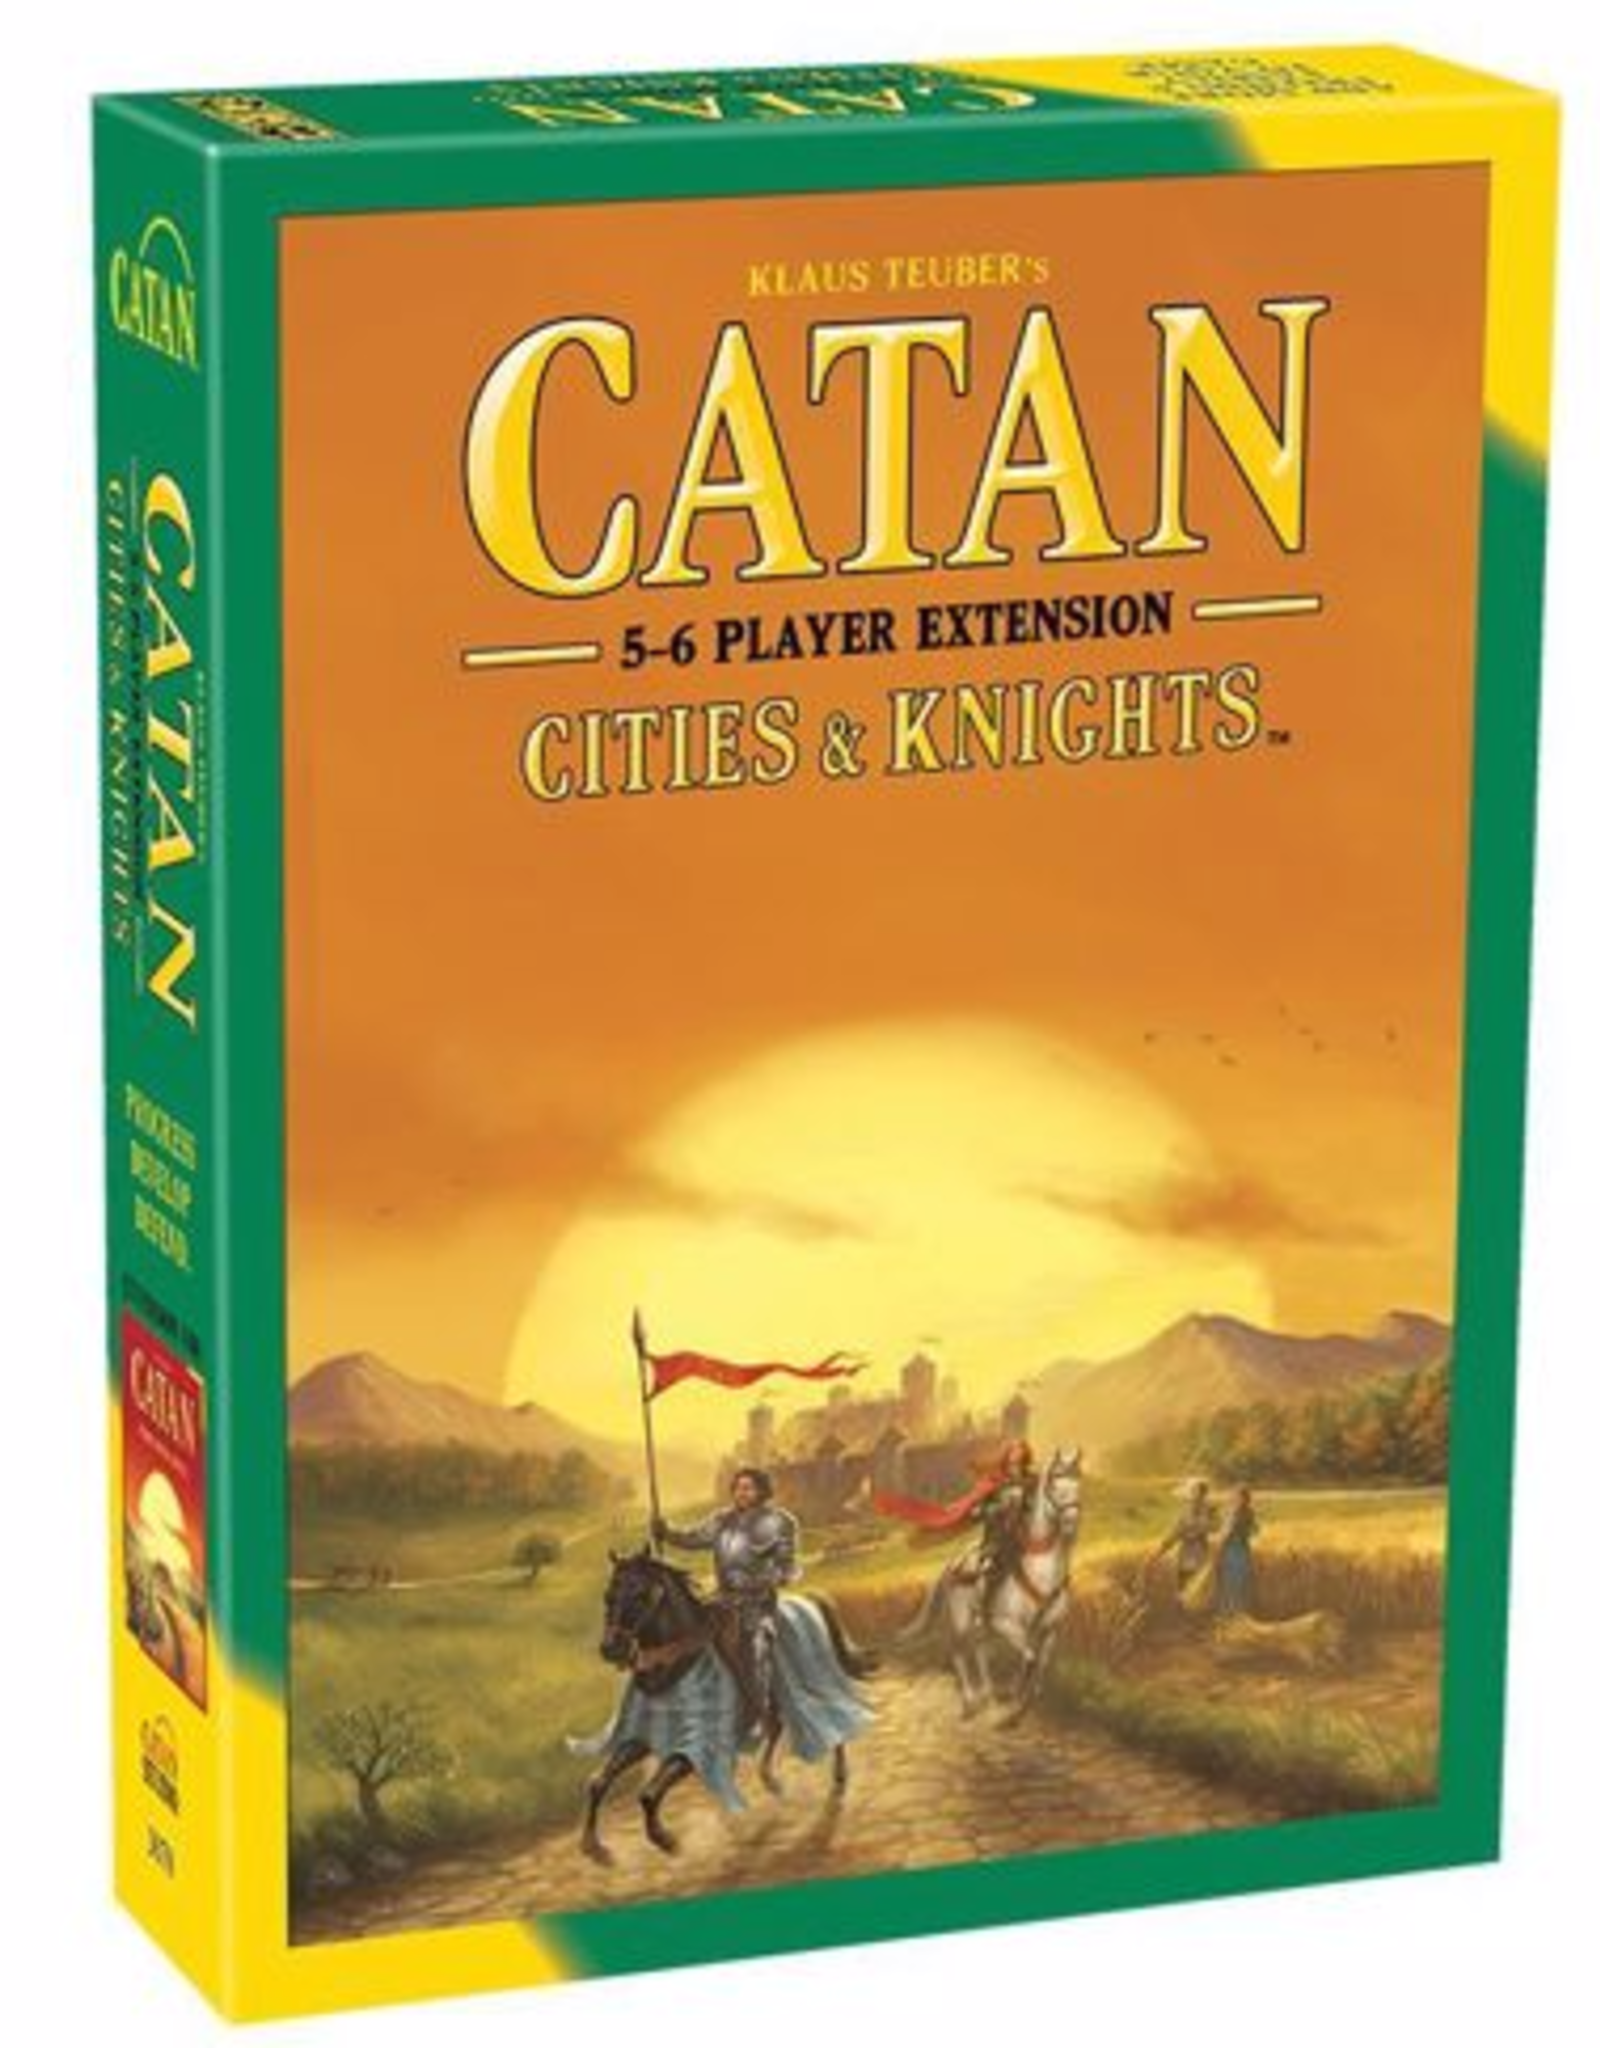 Catan Studio Catan Cities and Knights 5-6 Player Extension